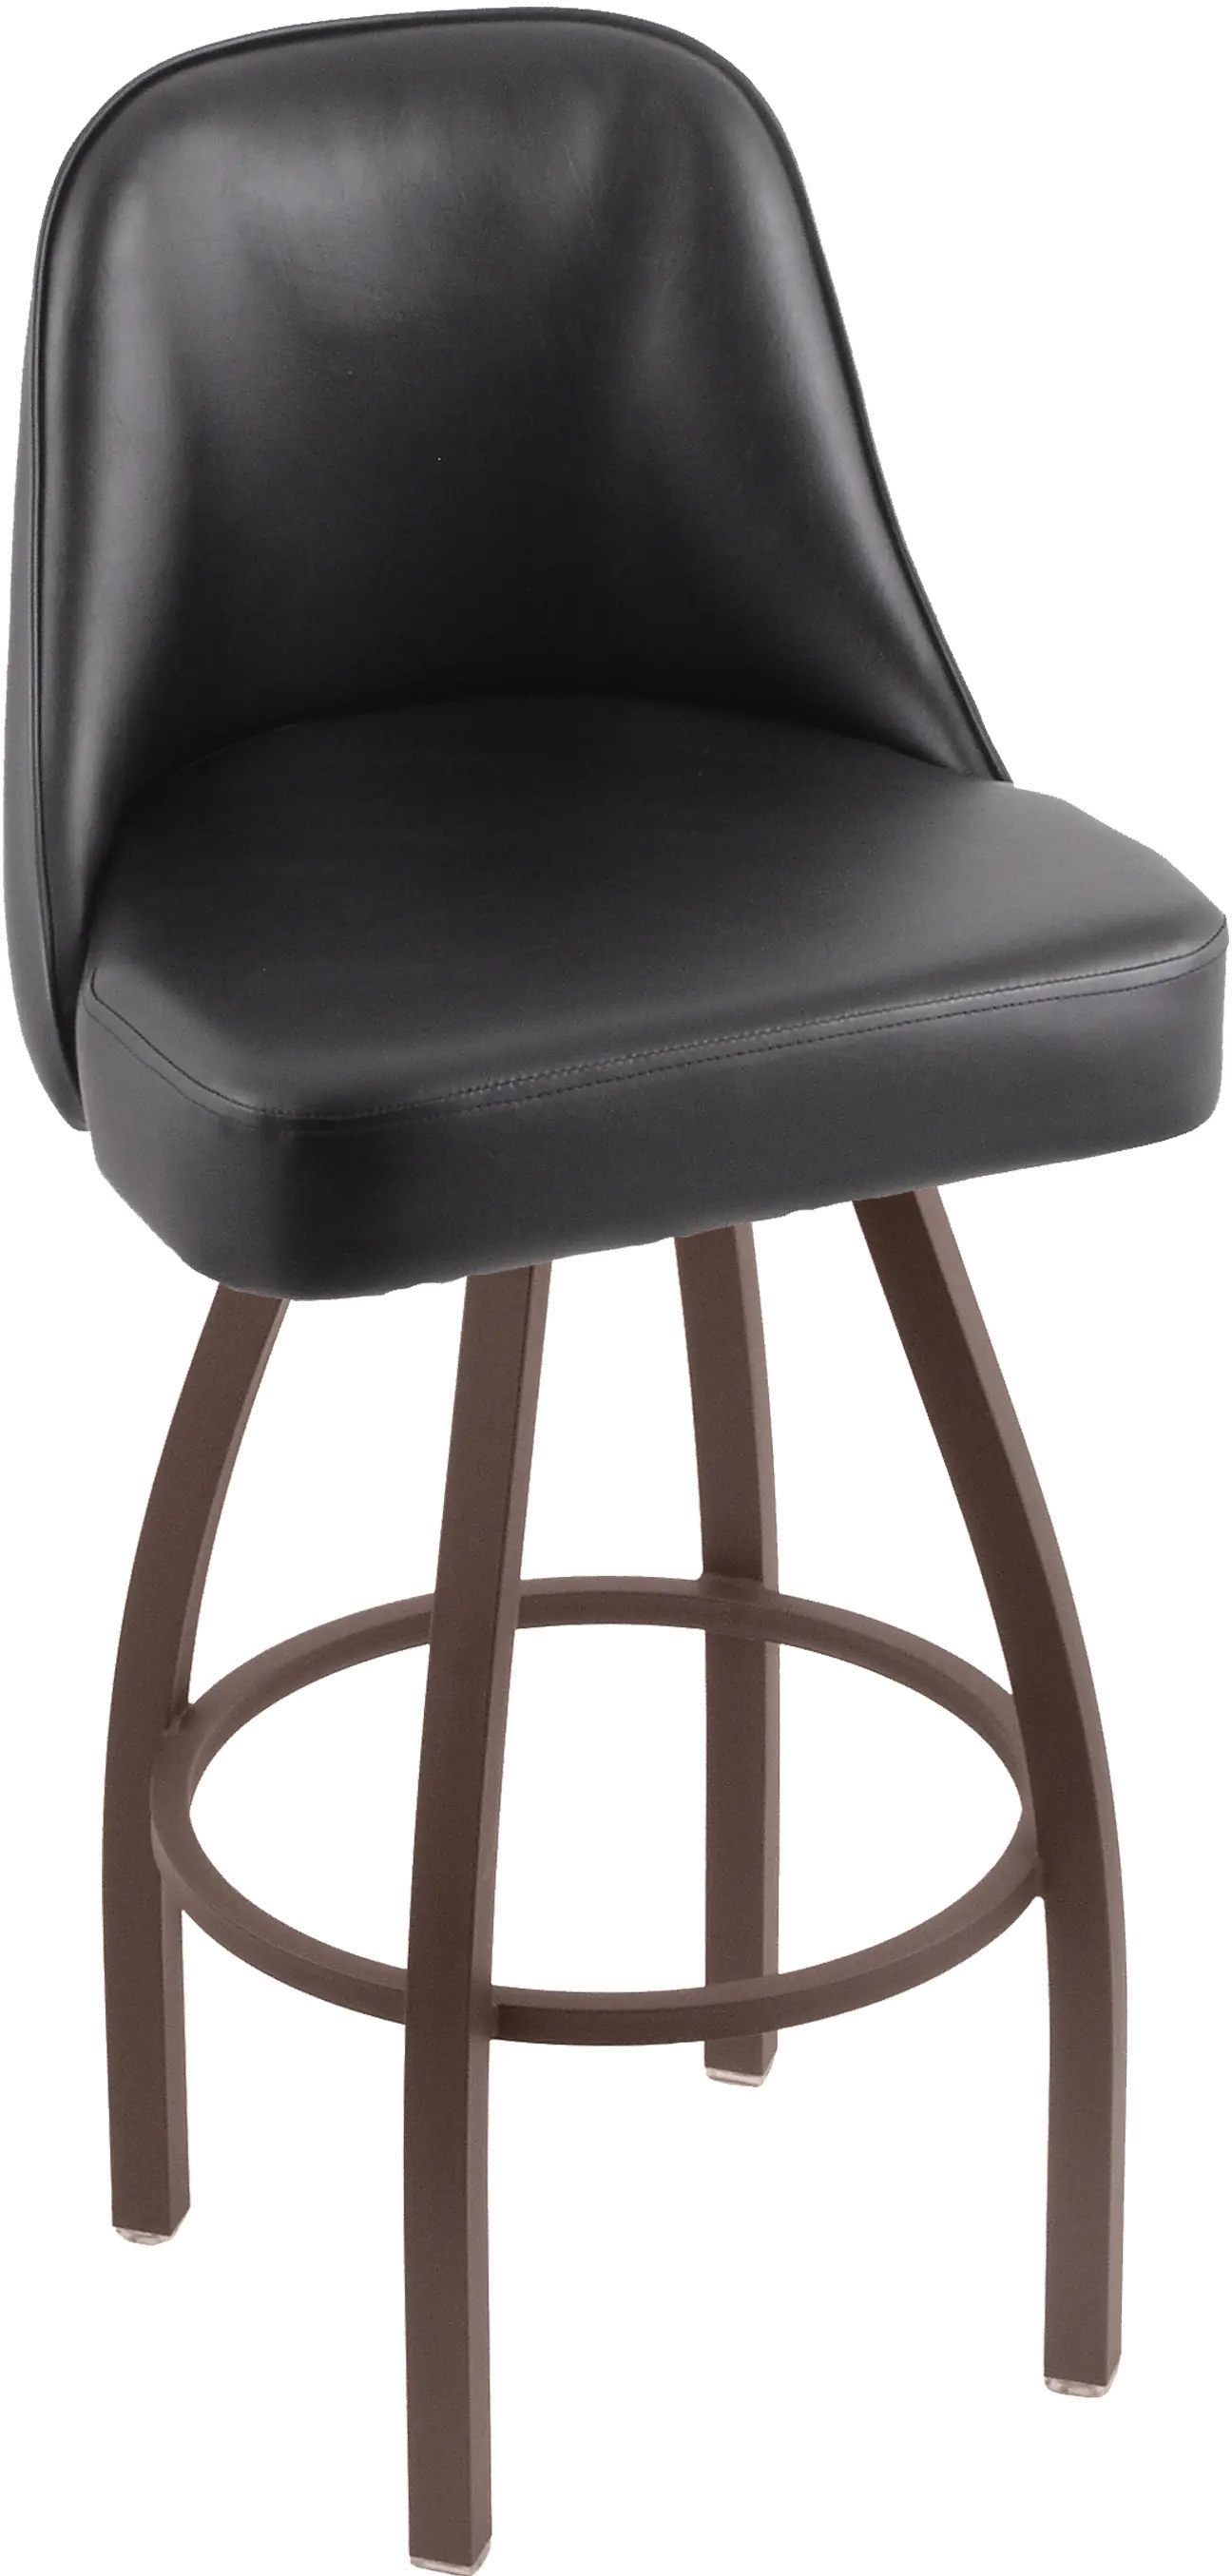 Grizzly Bronze Metal Upholstered Swivel Bar Stool